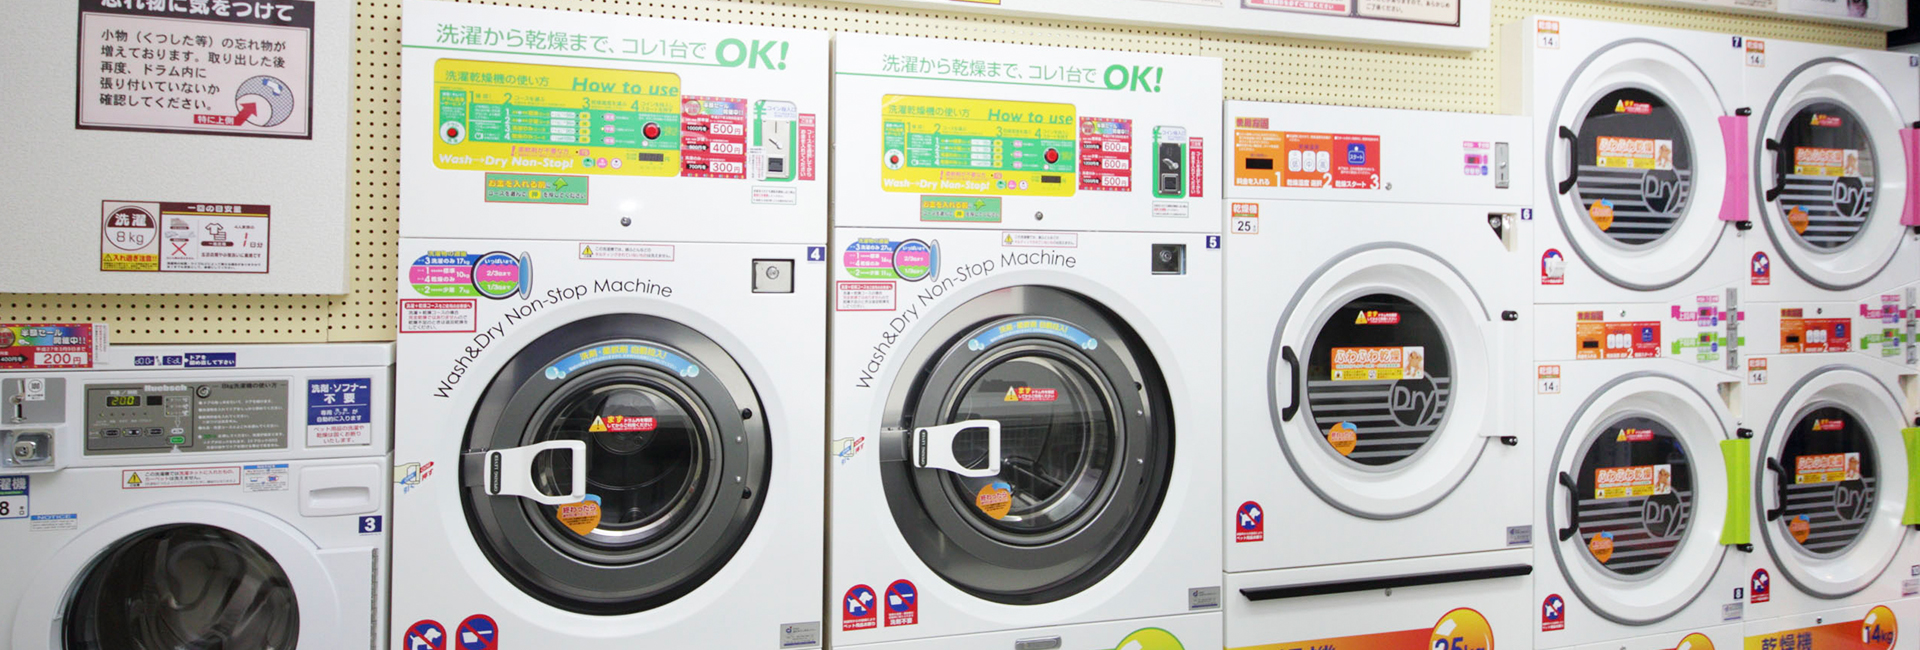 Sentaku (Laundry) – Four Years in Japan … and now Three Years in London